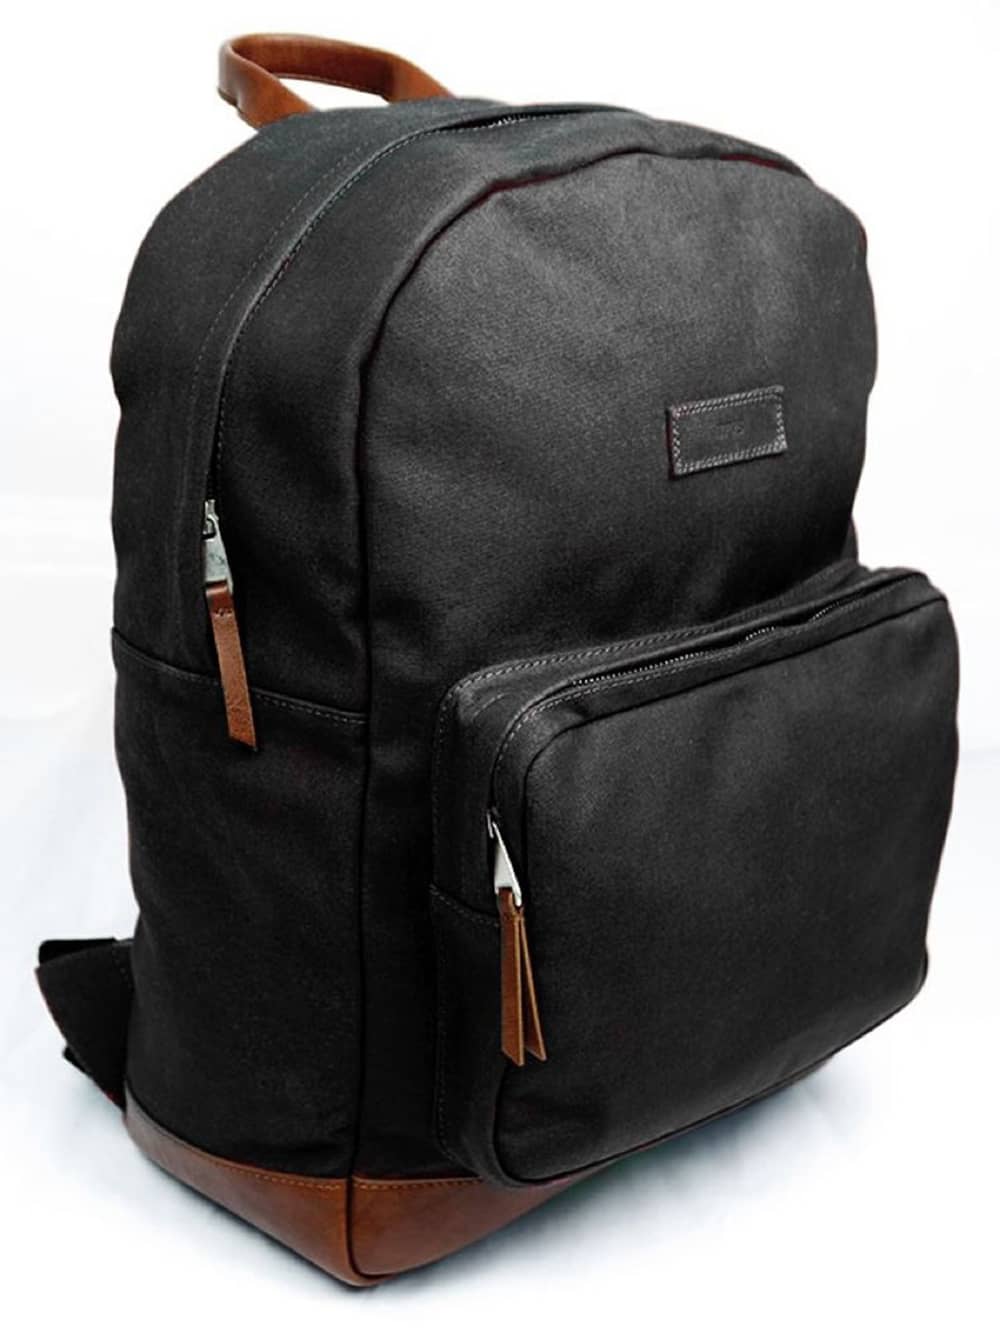 Black canvas backpack with brown vegan leather trim from Wills Vegan Store